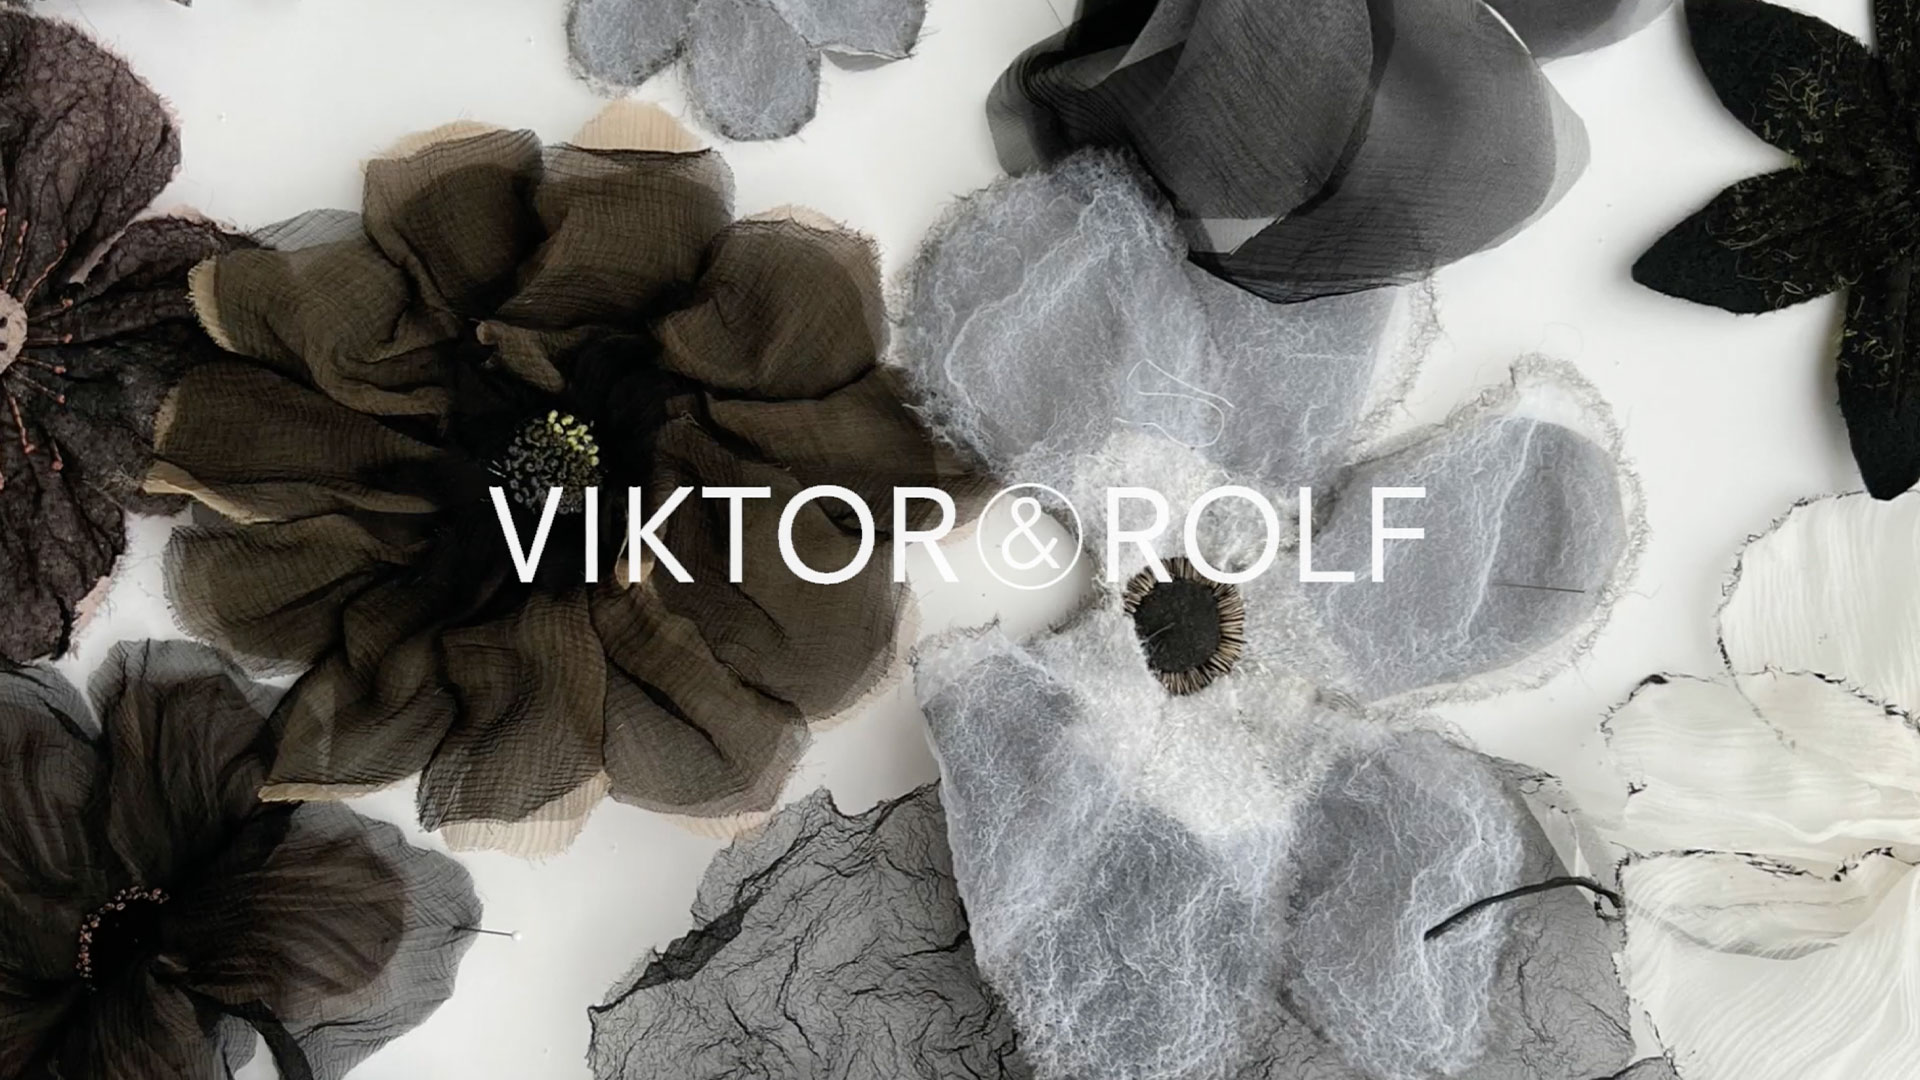 SPRING-SUMMER 2022 VIKTOR & ROLF HAUTE COUTURE COLLECTION